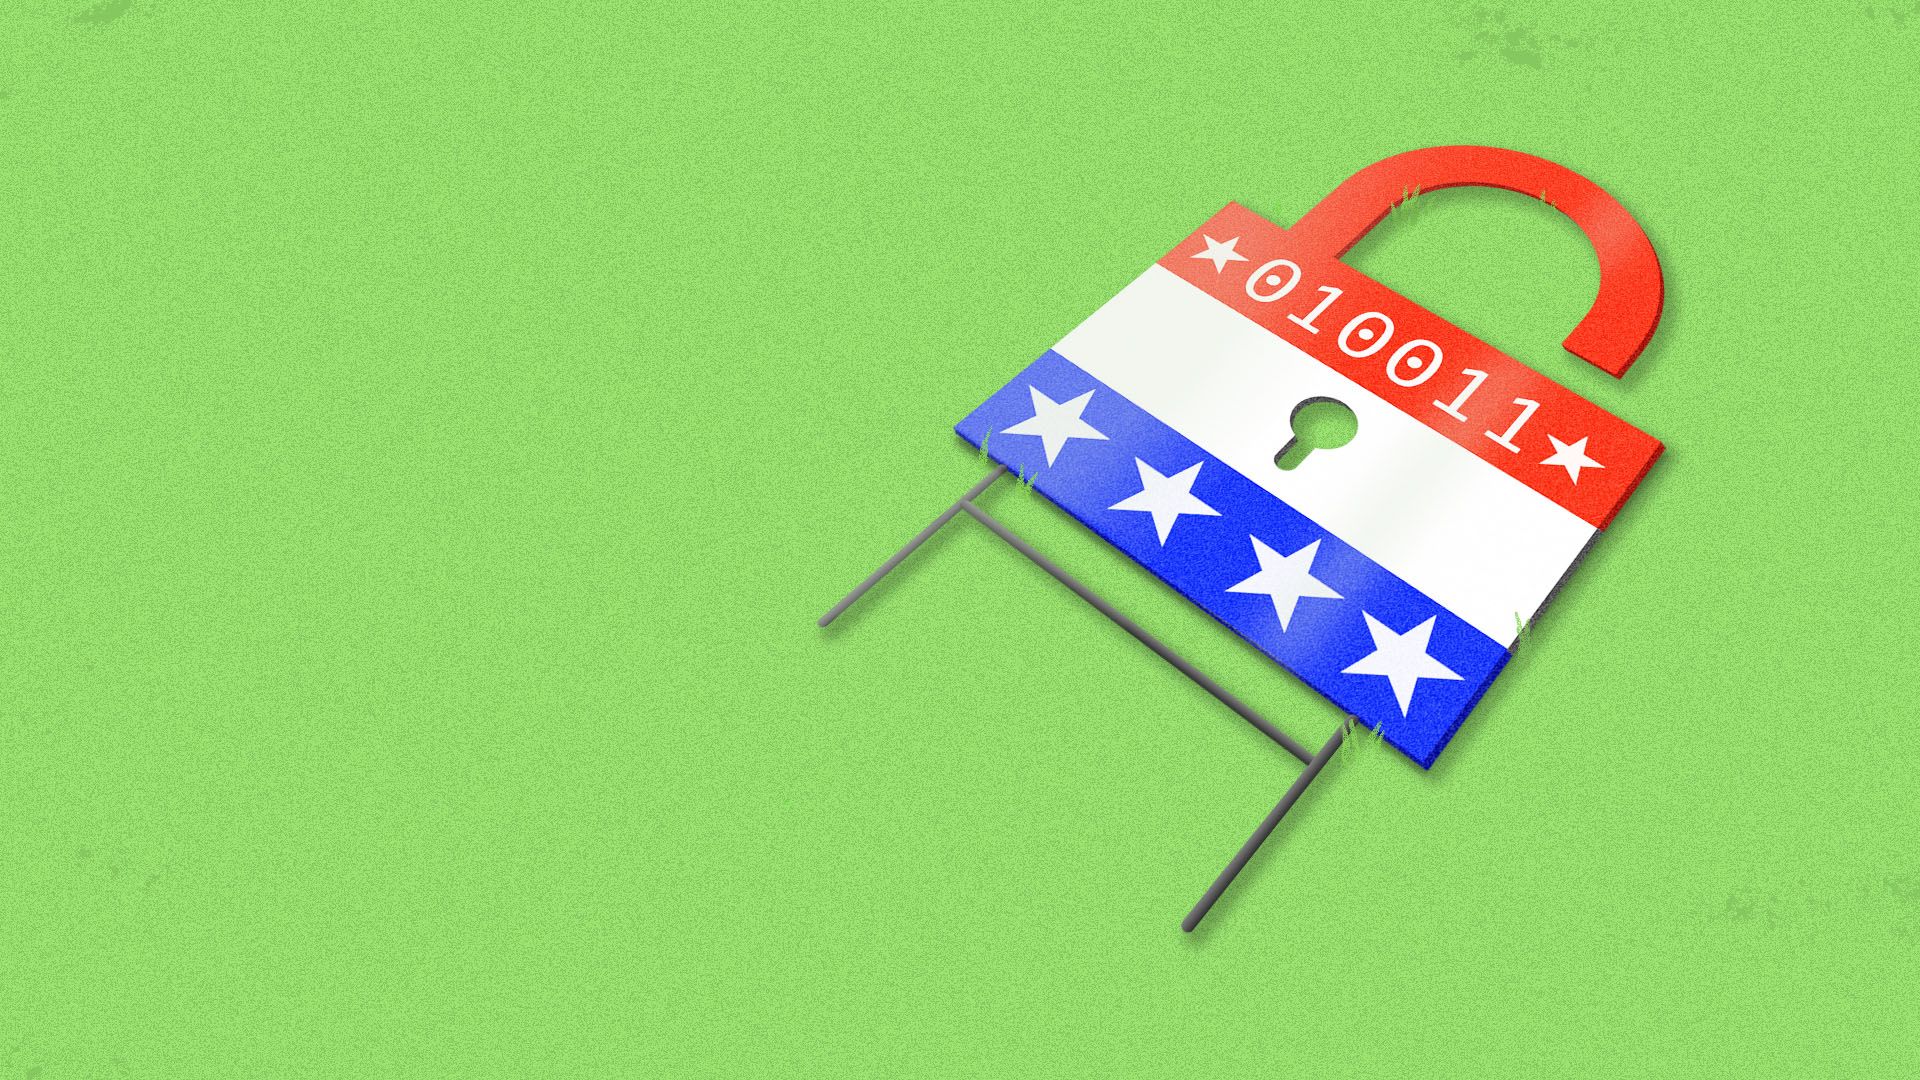  Illustration of campaign yard sign in the shape of a padlock on the ground